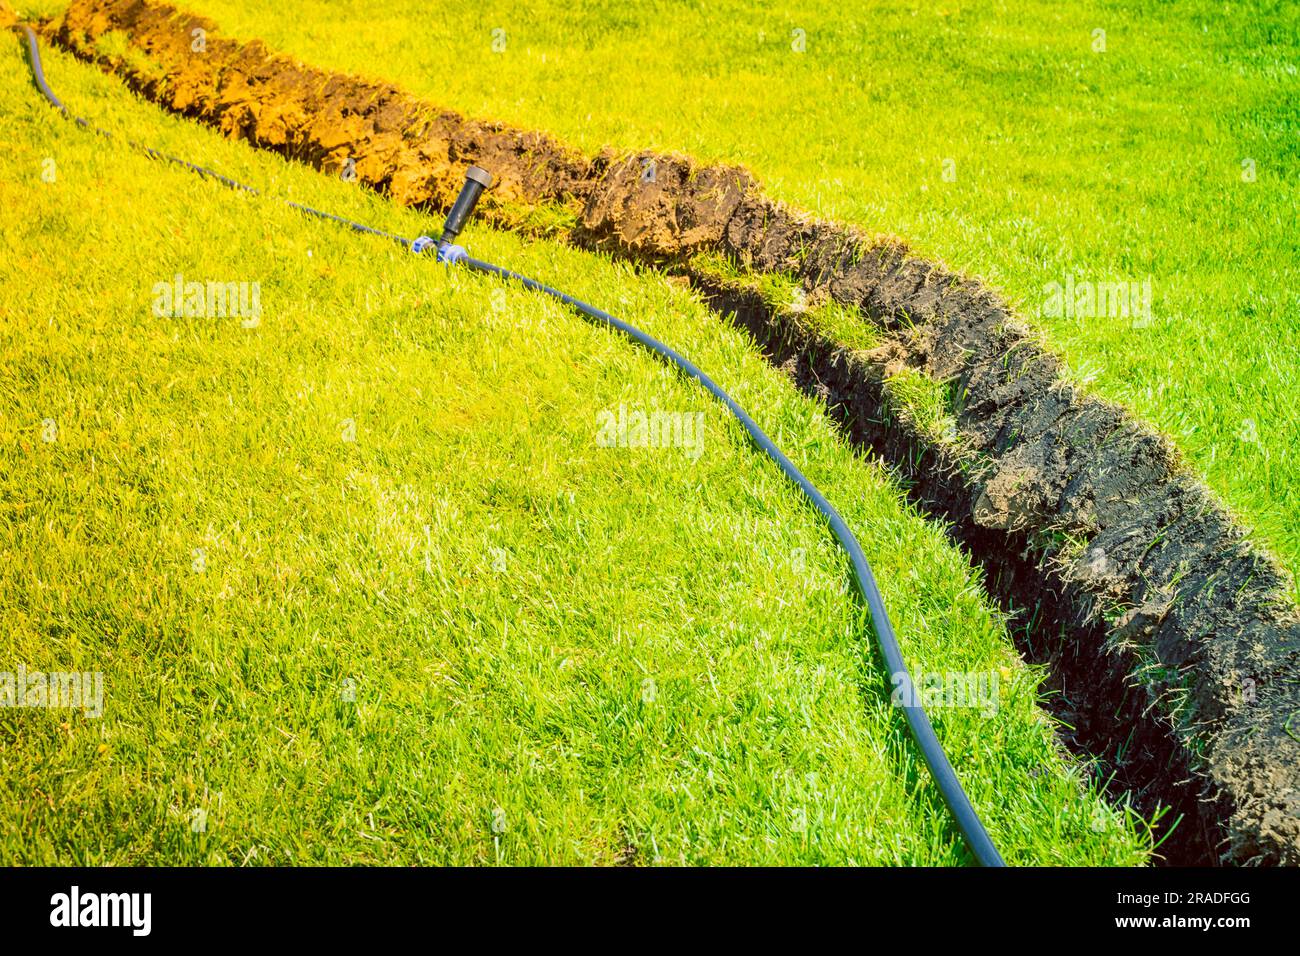 Self-installation of irrigation with a retractable sprinkler in the finished lawn. Laying water pipes with sprayers under the lawn for irrigation. Stock Photo